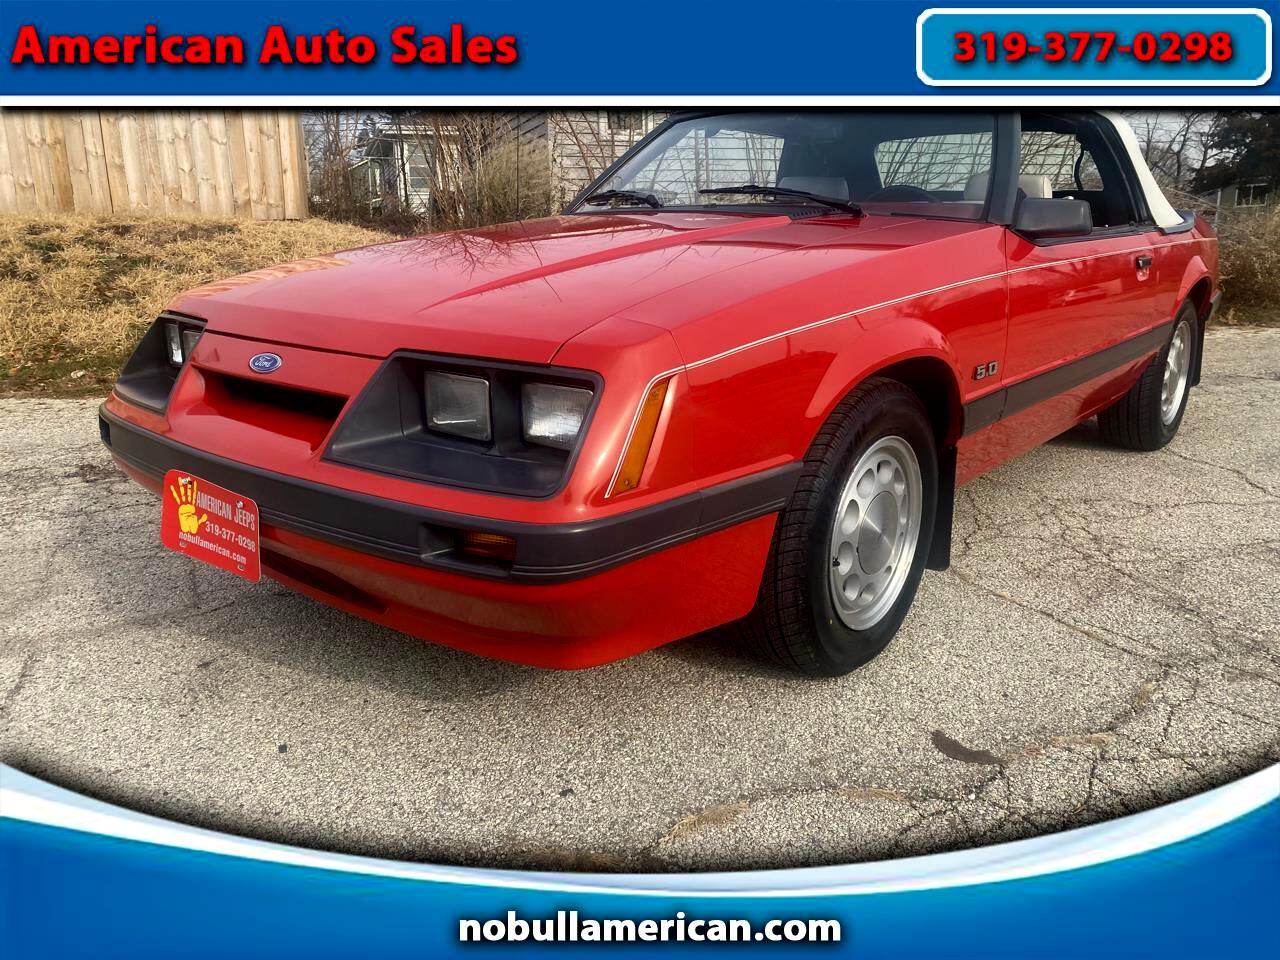 Ford Mustang 2dr Convertible LX 5.0L 1986